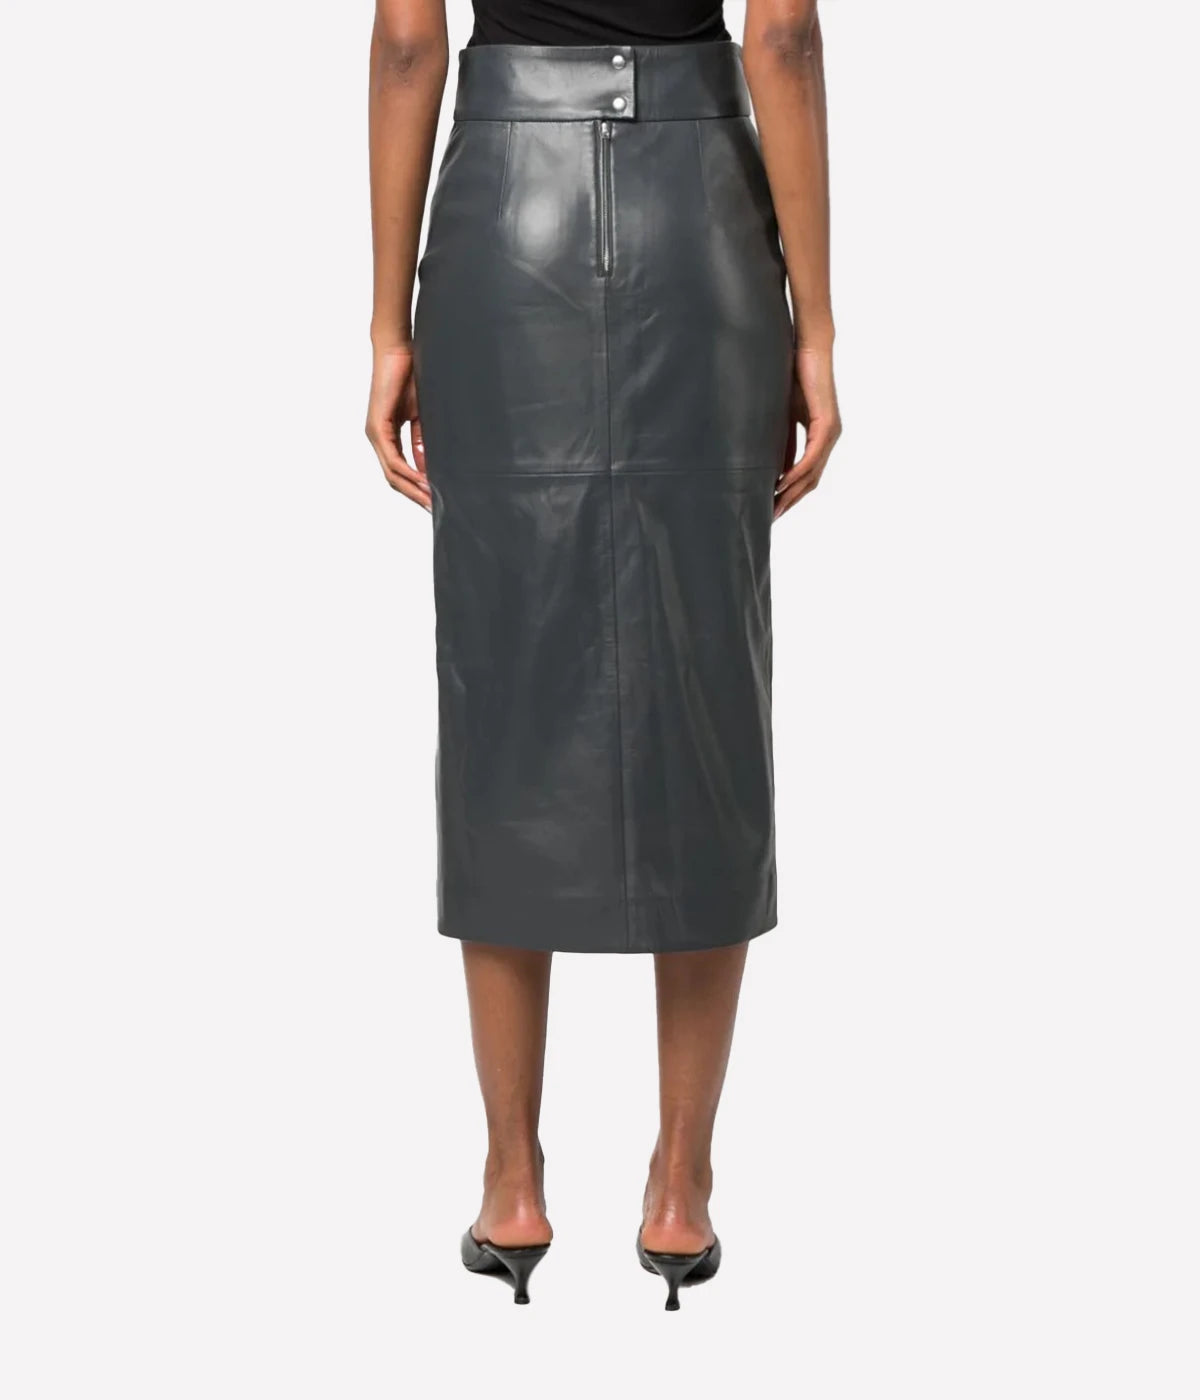 Maglia Skirt in Anthracite Grey